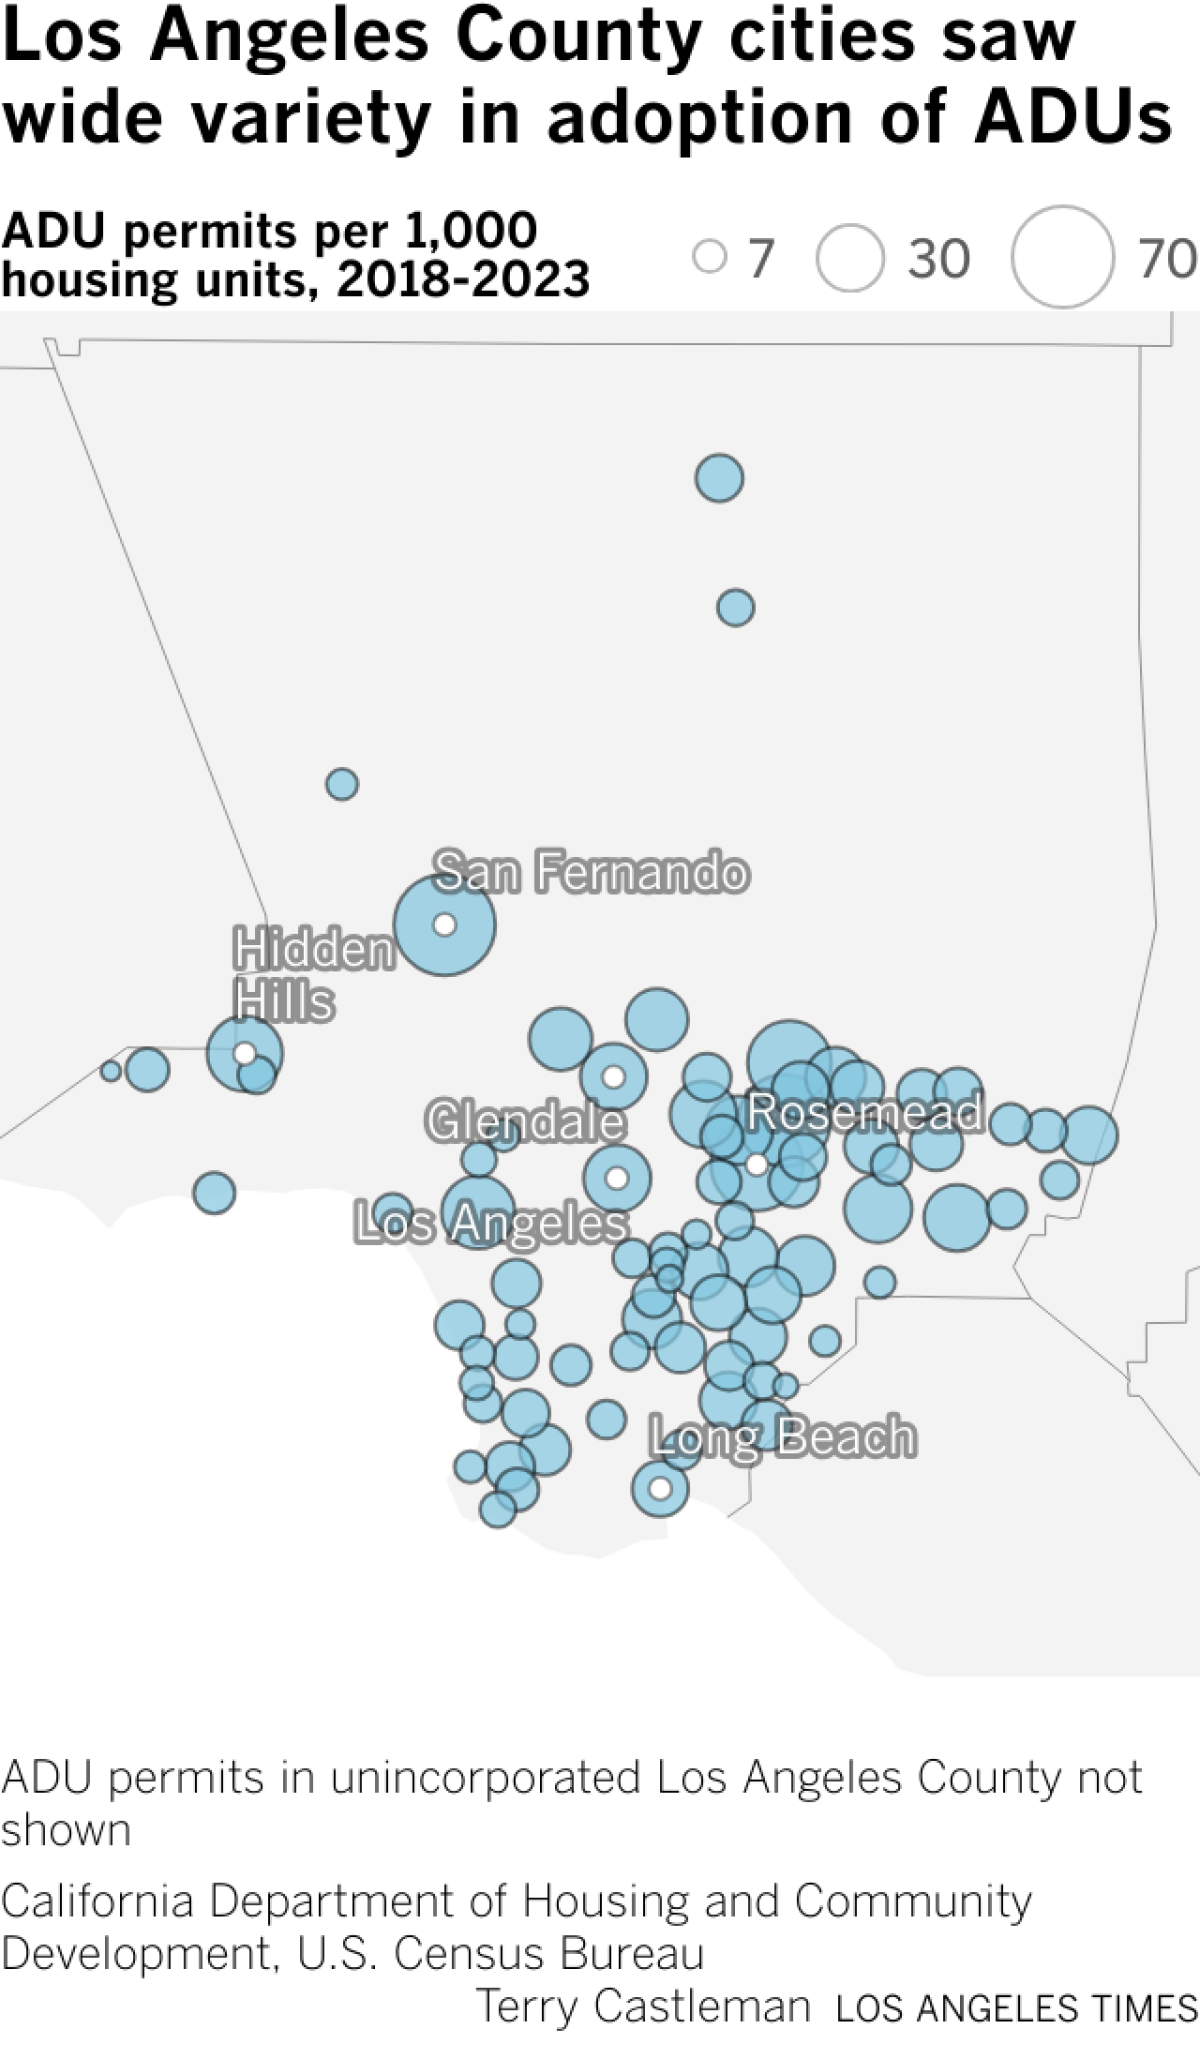 Map showing how many ADUs were permitted in each of Los Angeles County's cities.